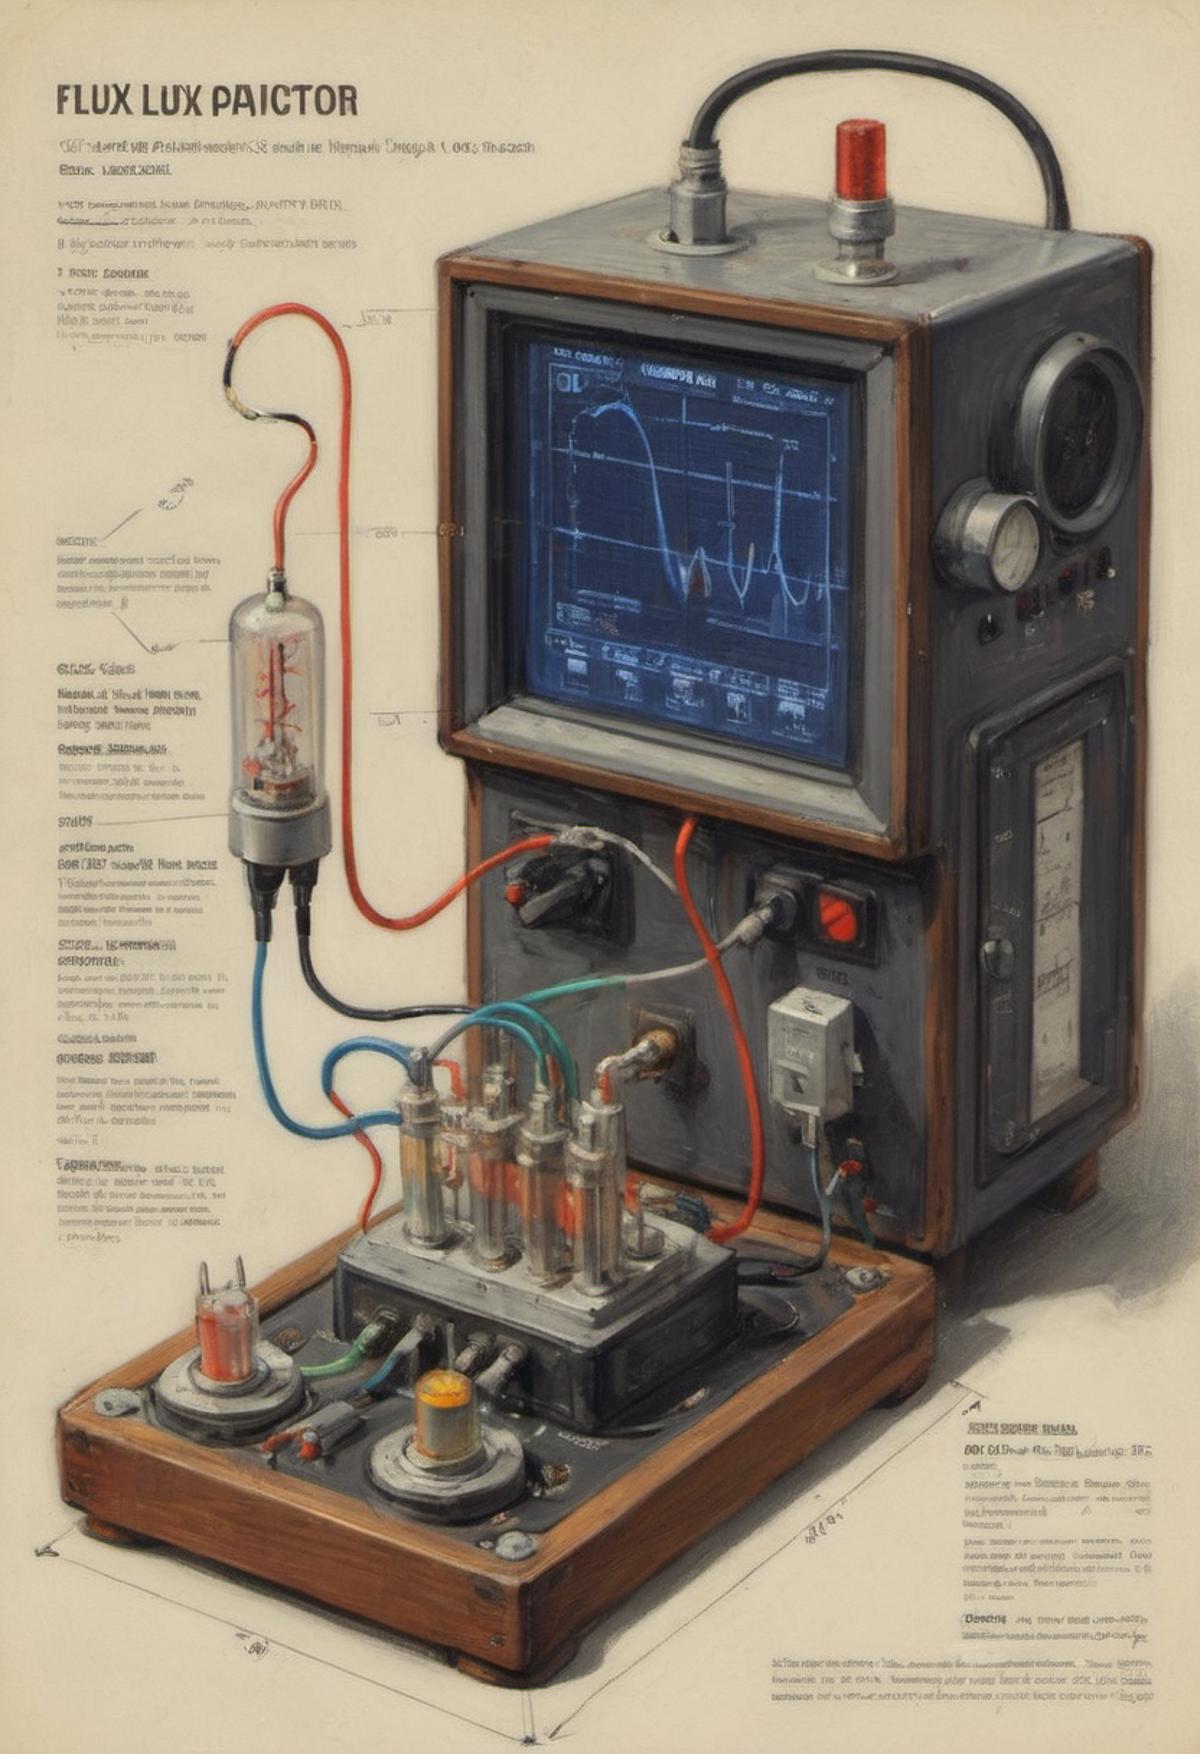 A drawing of an electronic device with a television screen and a diagram of the device.